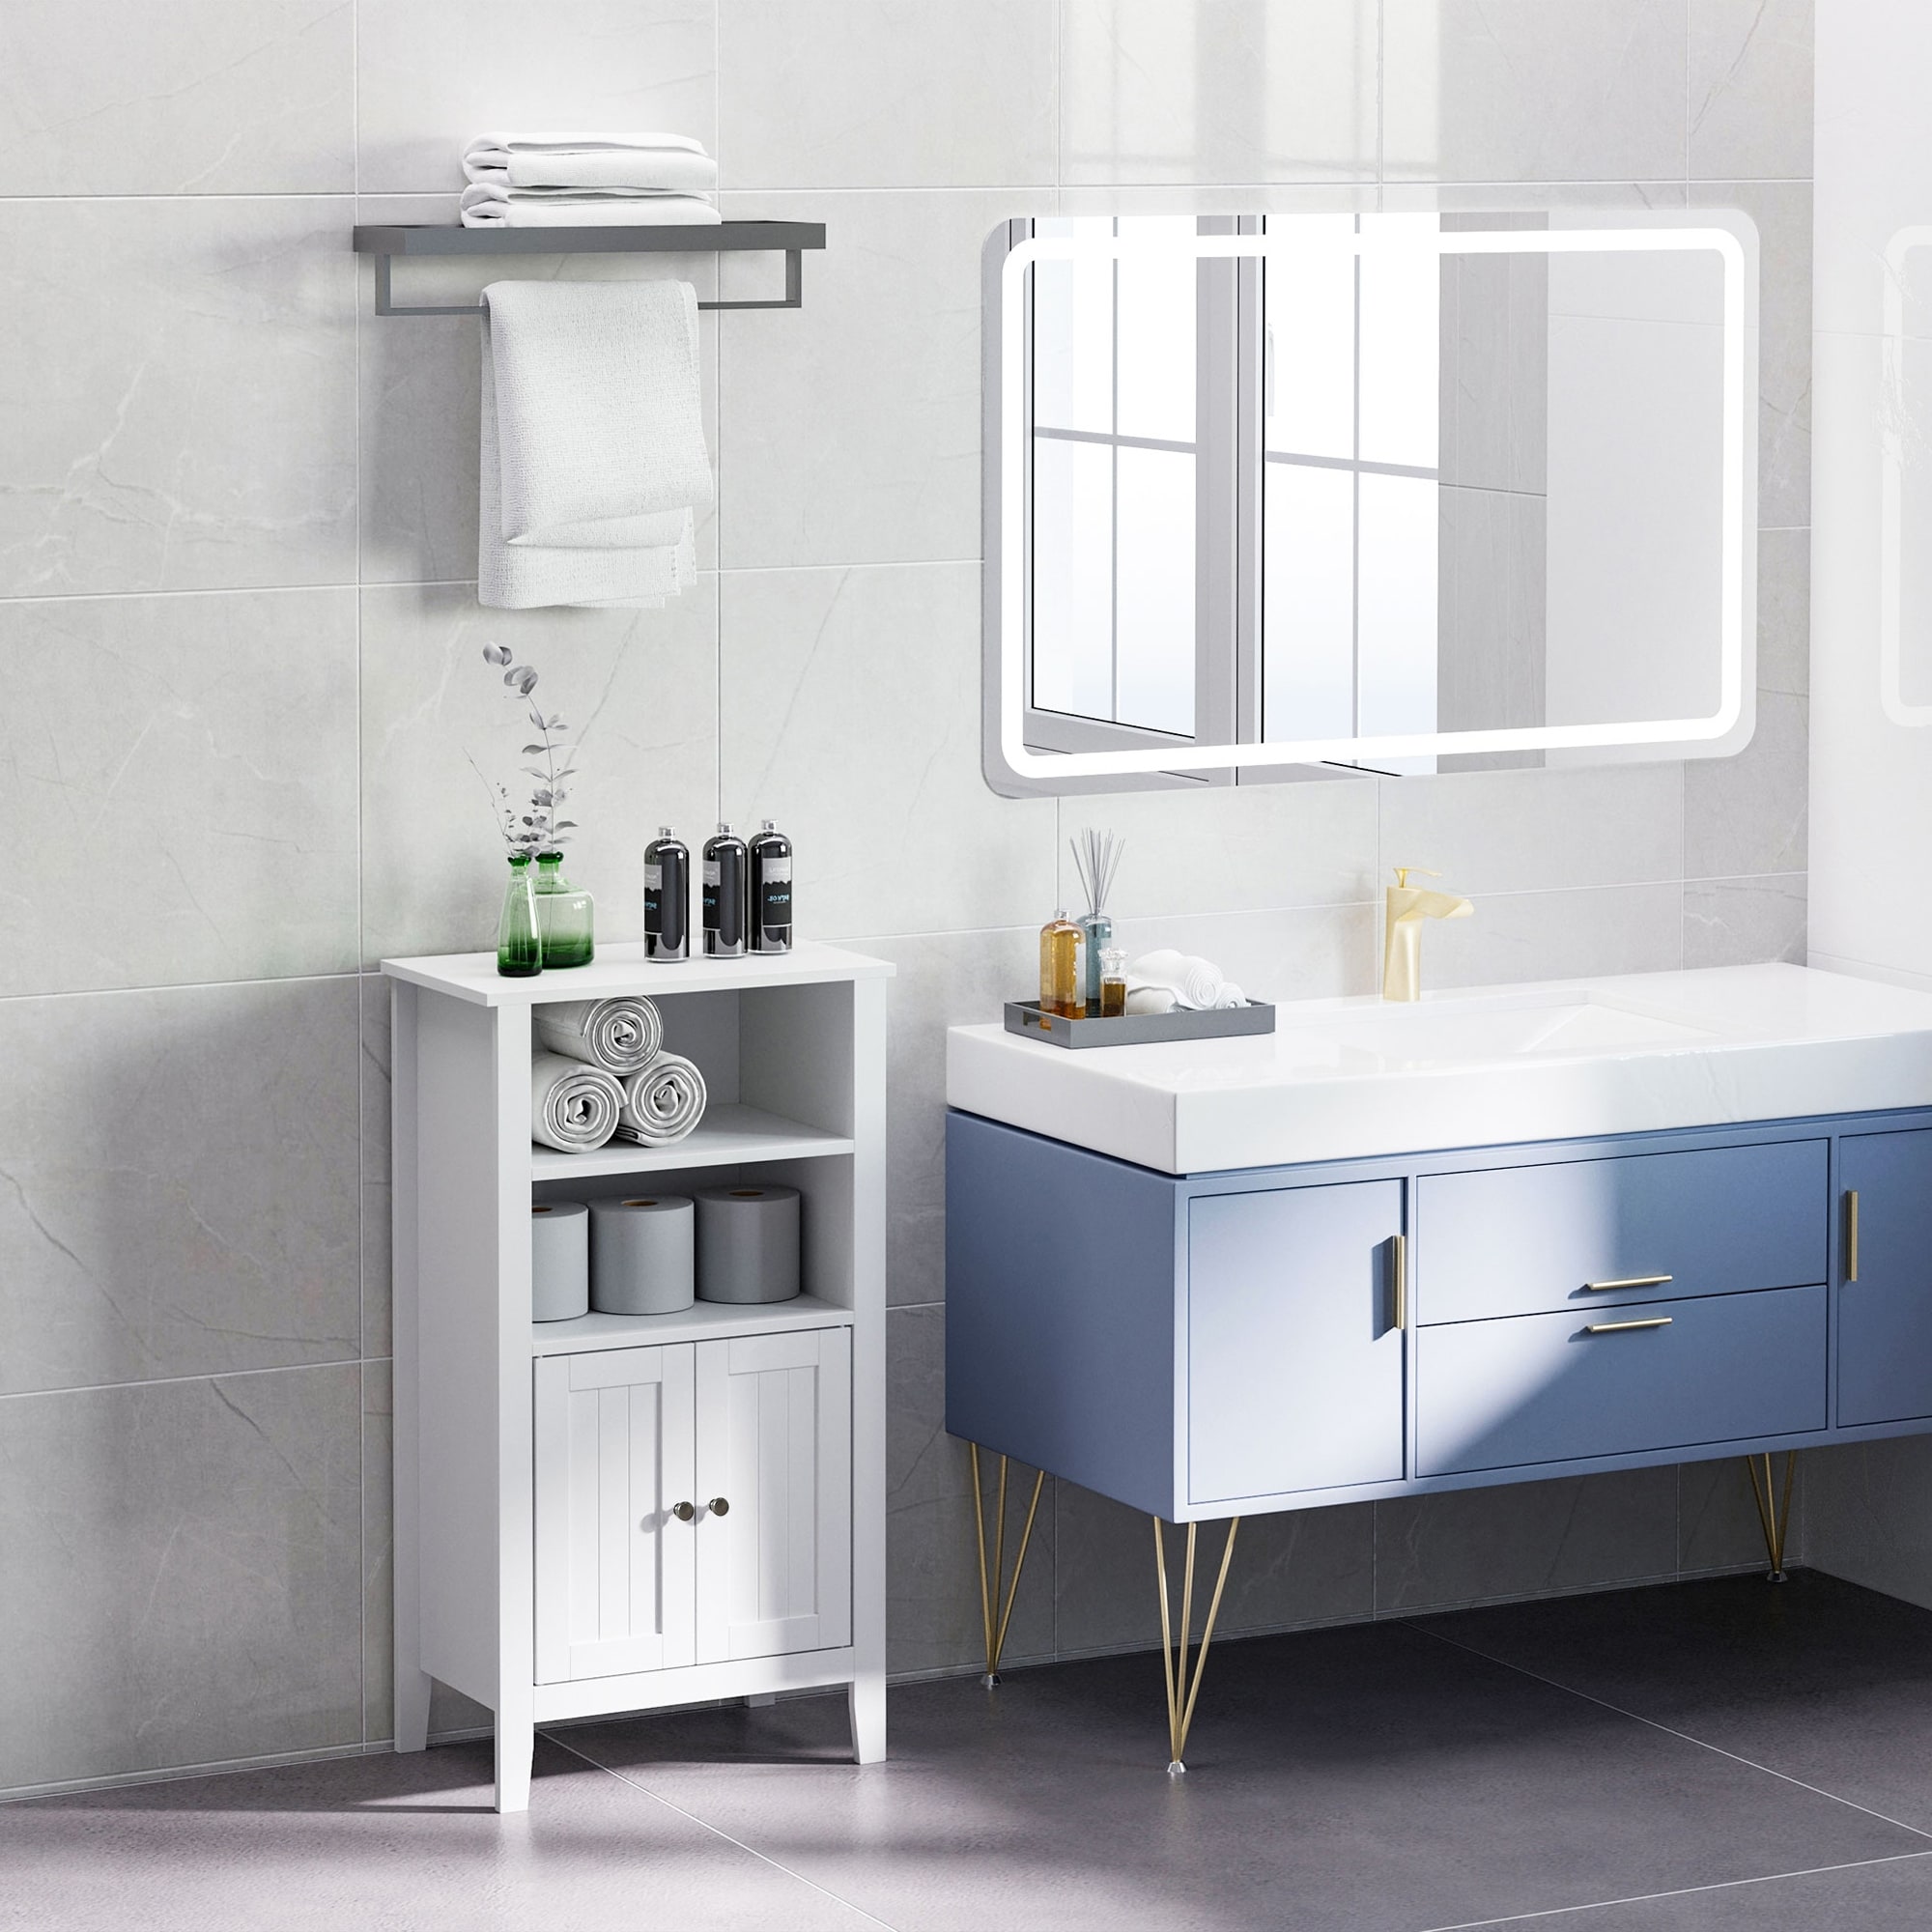 https://ak1.ostkcdn.com/images/products/is/images/direct/d3fd3c7261dc6d3113ec94ab838fbd8df8b08689/Kleankin-Bathroom-Cabinet-Organizer-with-2-Tier-Open-Shelves%2C-Double-Door-Enclosed-Storage-and-Elevated-Base.jpg